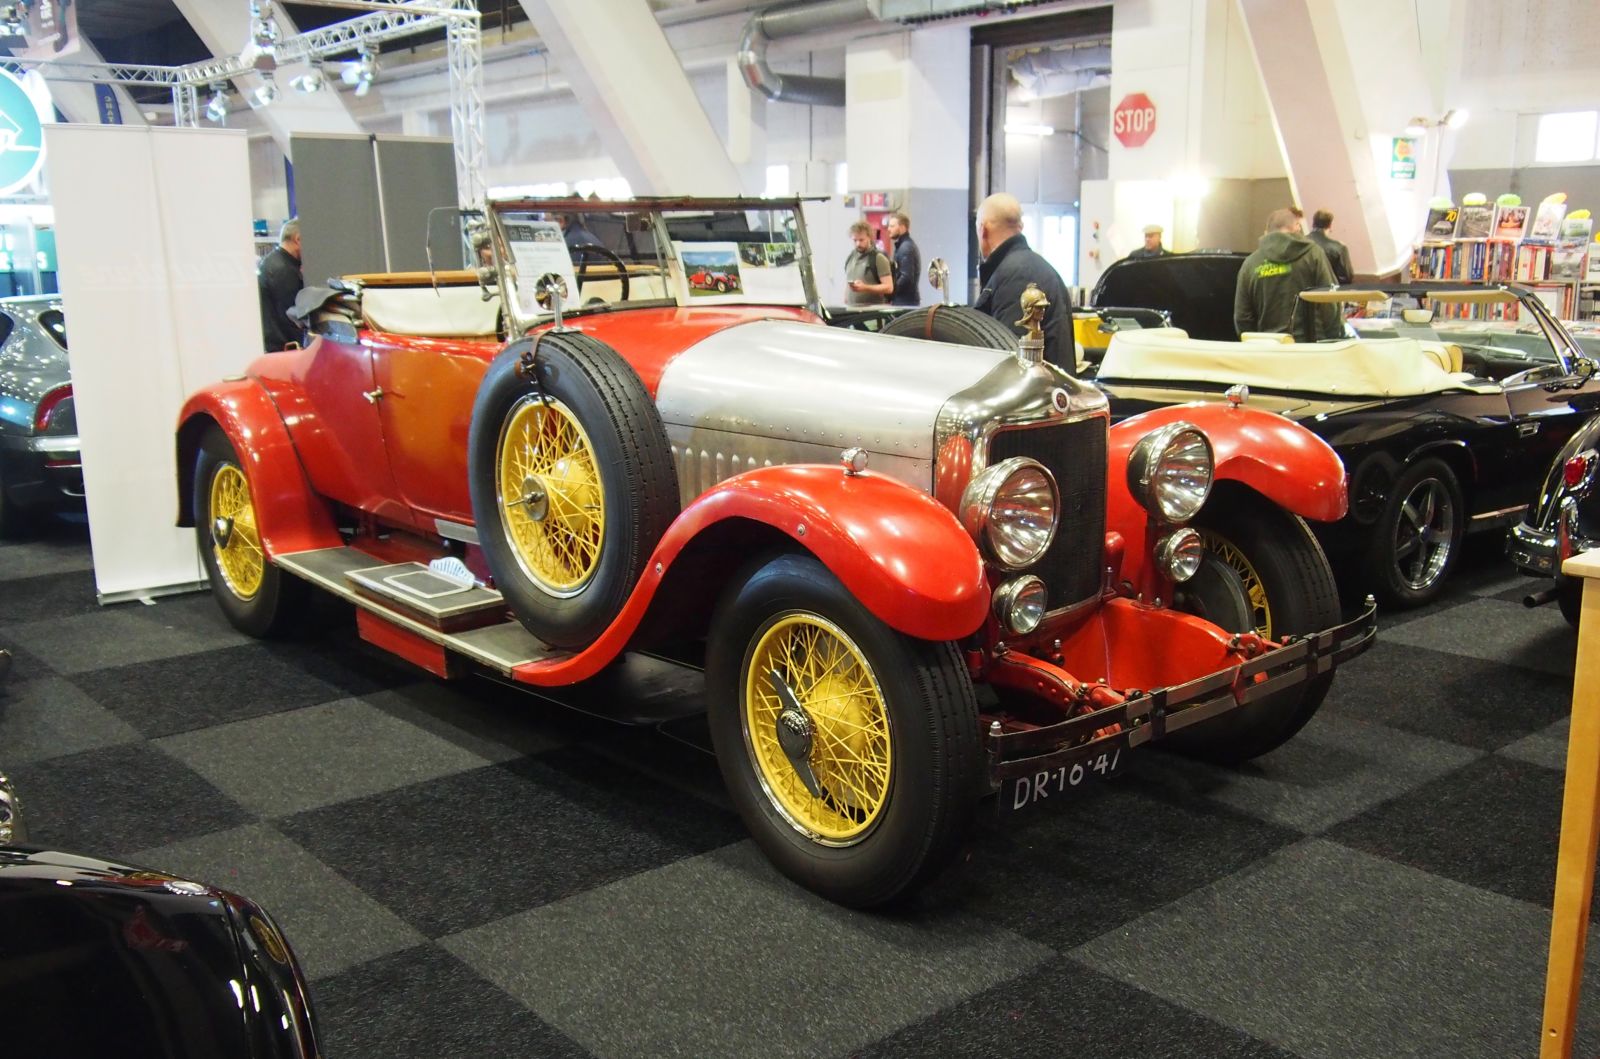 Belgian built 1925 Minerva AB Roadster that’s apparently only had 4 owners since new.